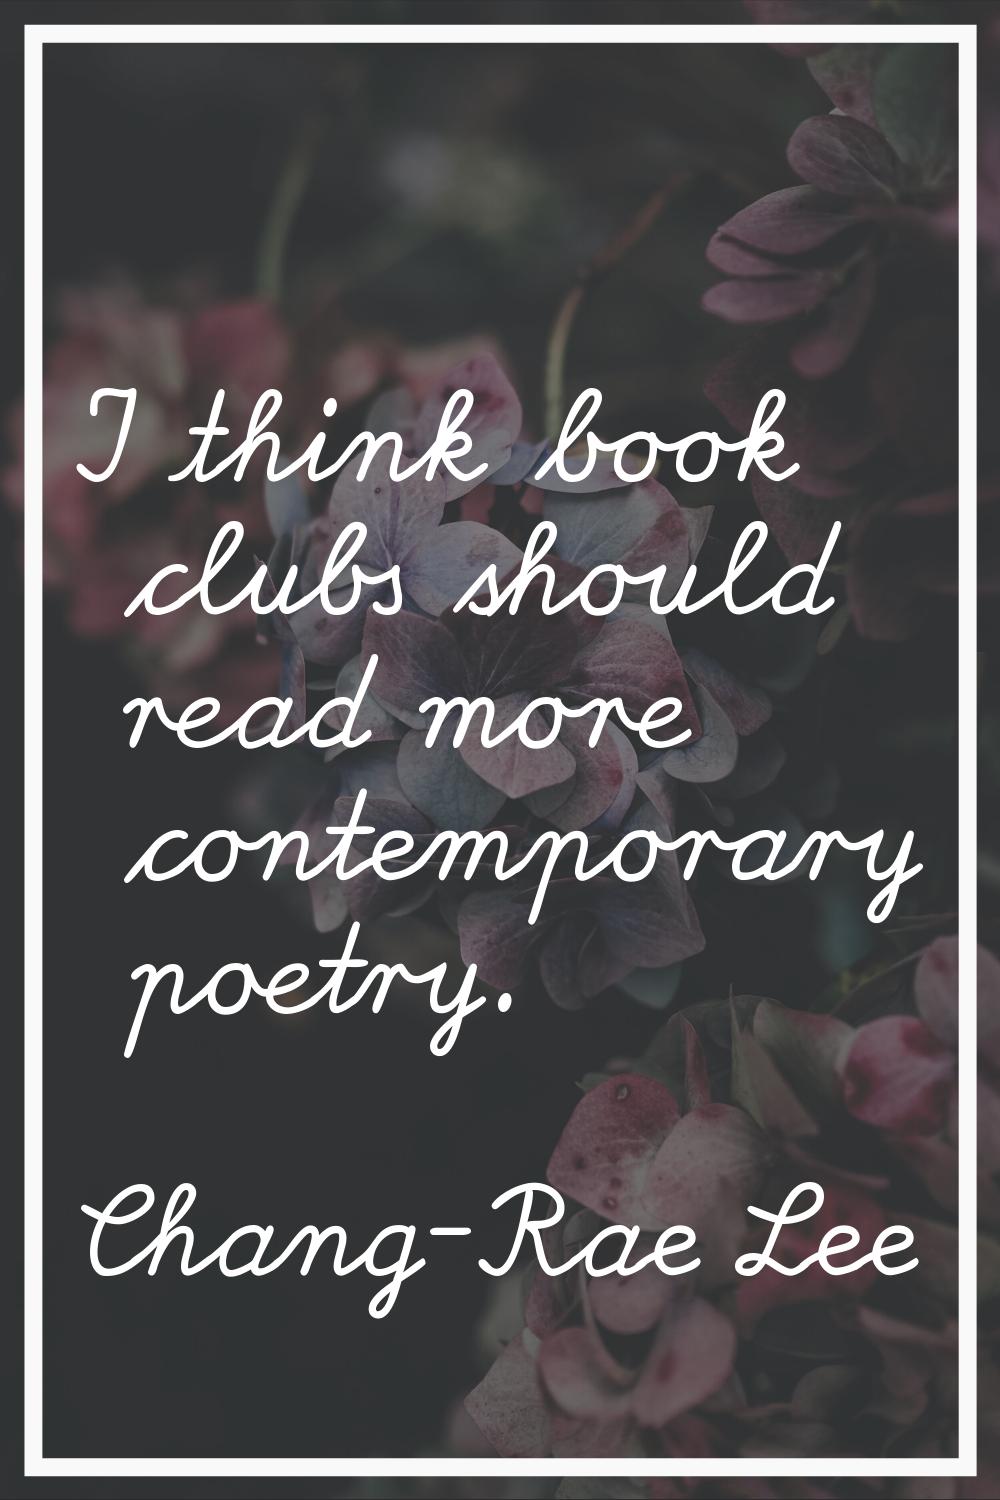 I think book clubs should read more contemporary poetry.